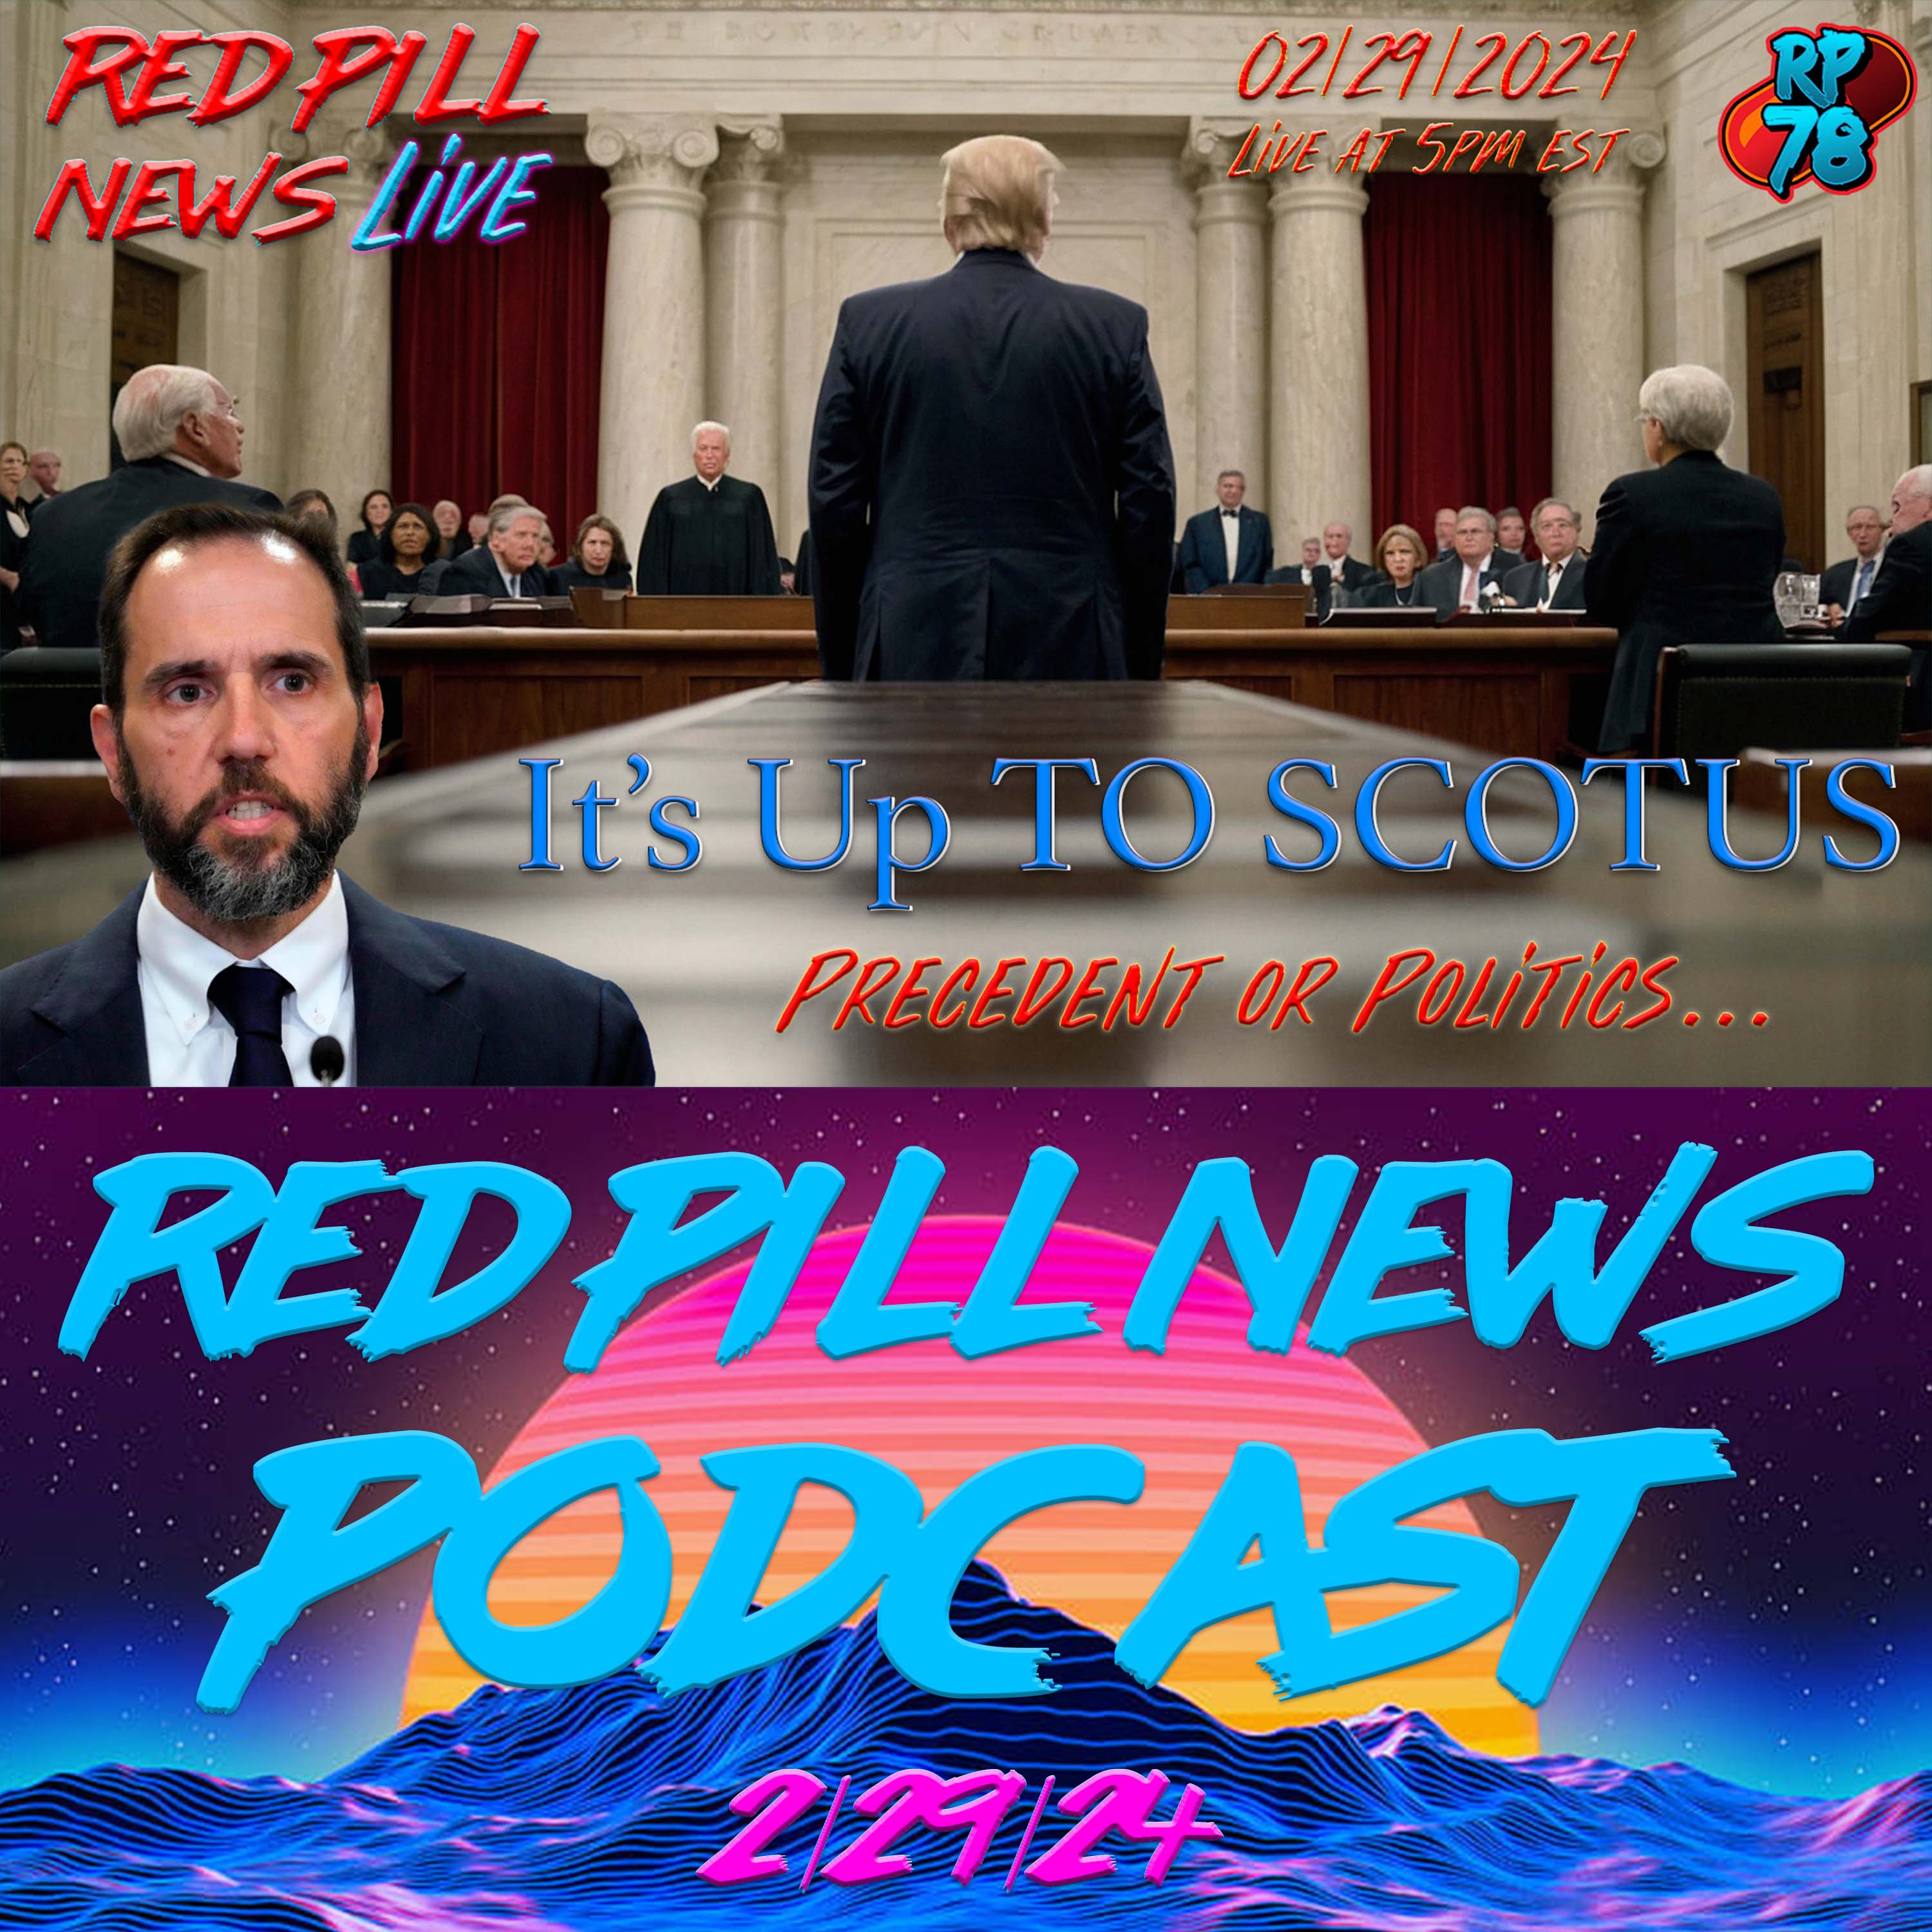 It's up to SCOTUS to Save POTUS on Red Pill News Live